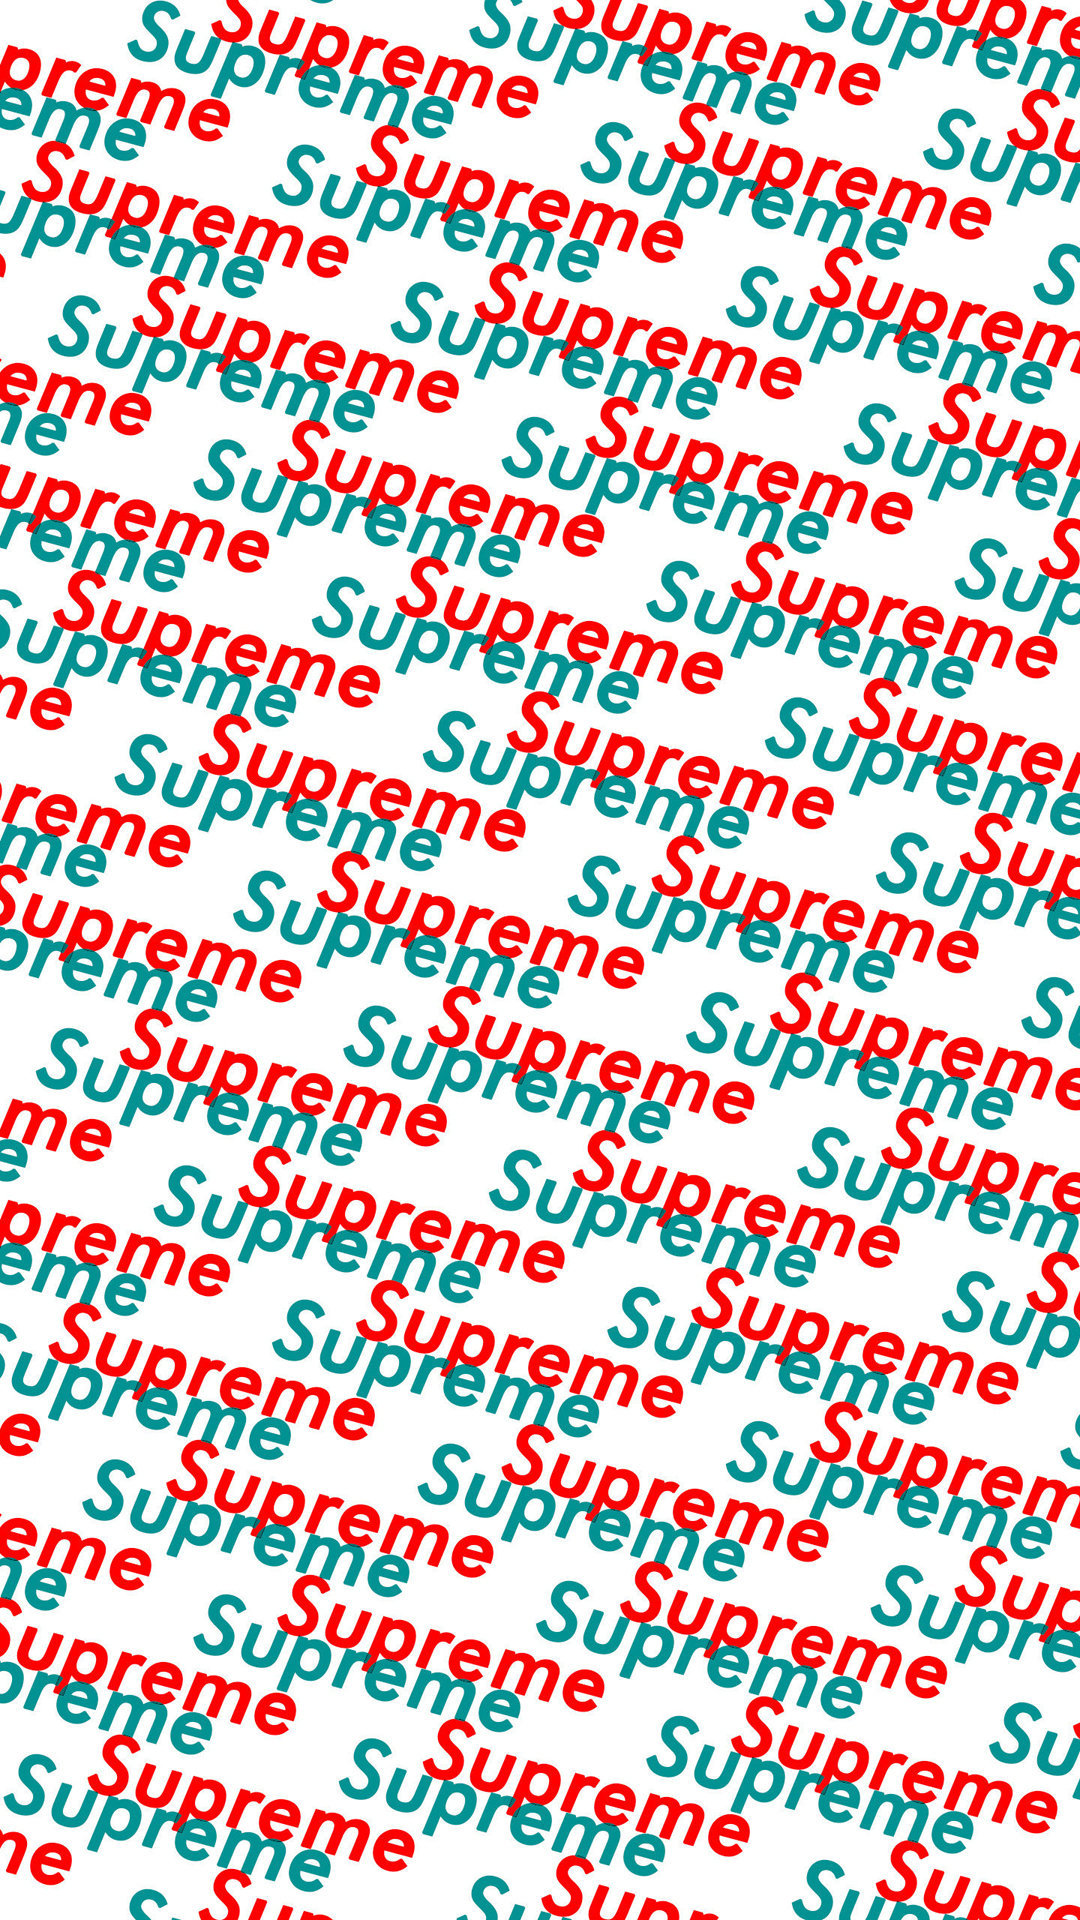 Supreme Red Green Text